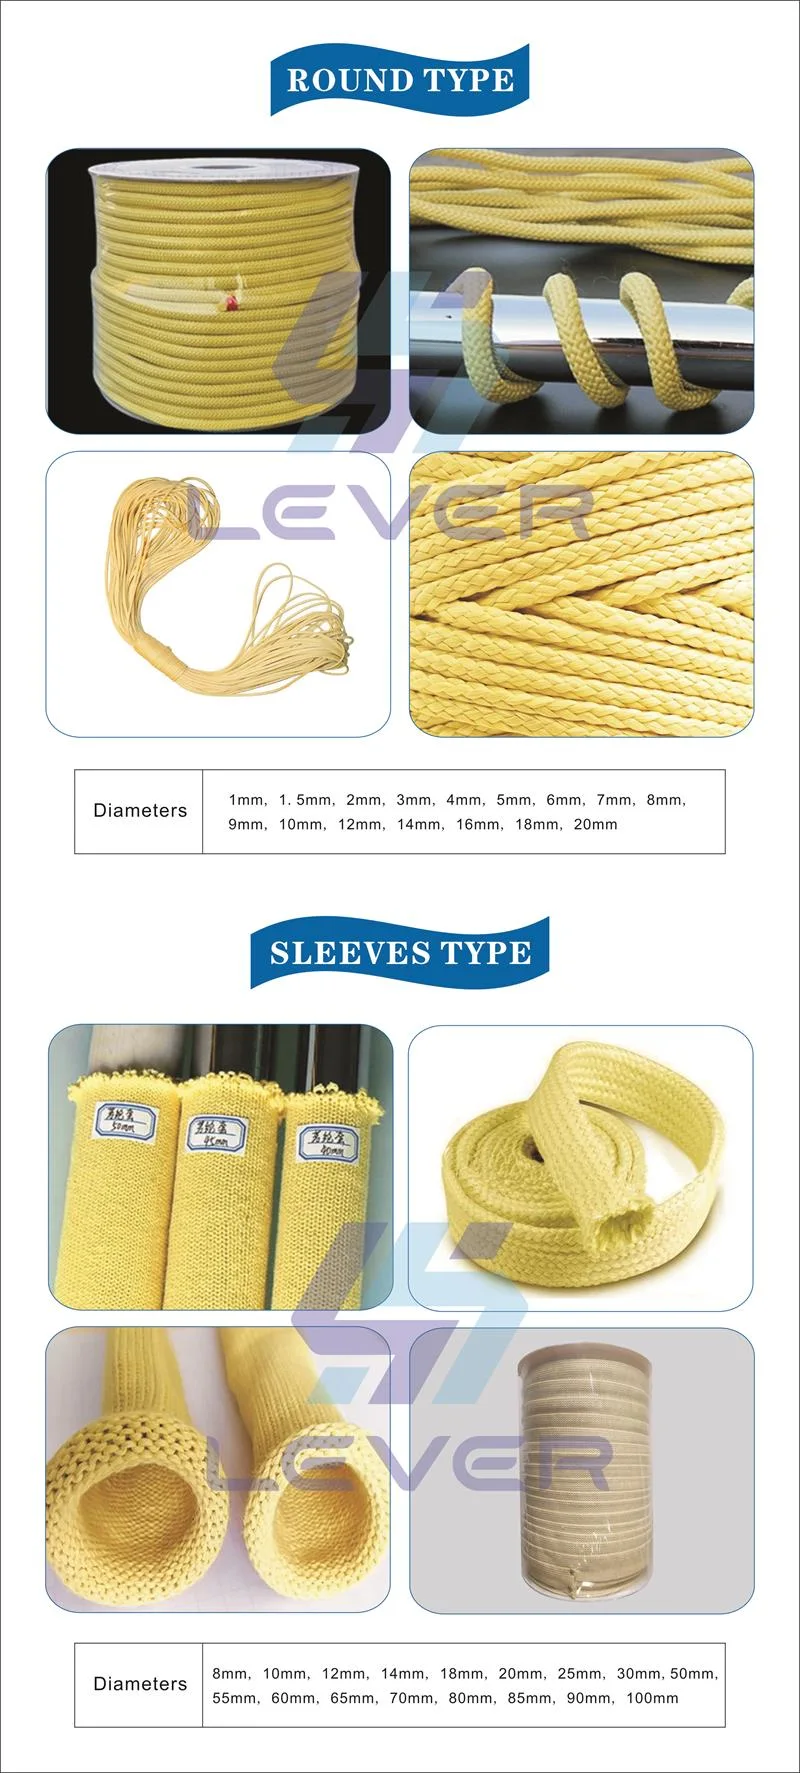 High Strength Kevlar Boat Rescue Winch Mooring Rope, Kevlar Aramid Rope for Safety Rescue